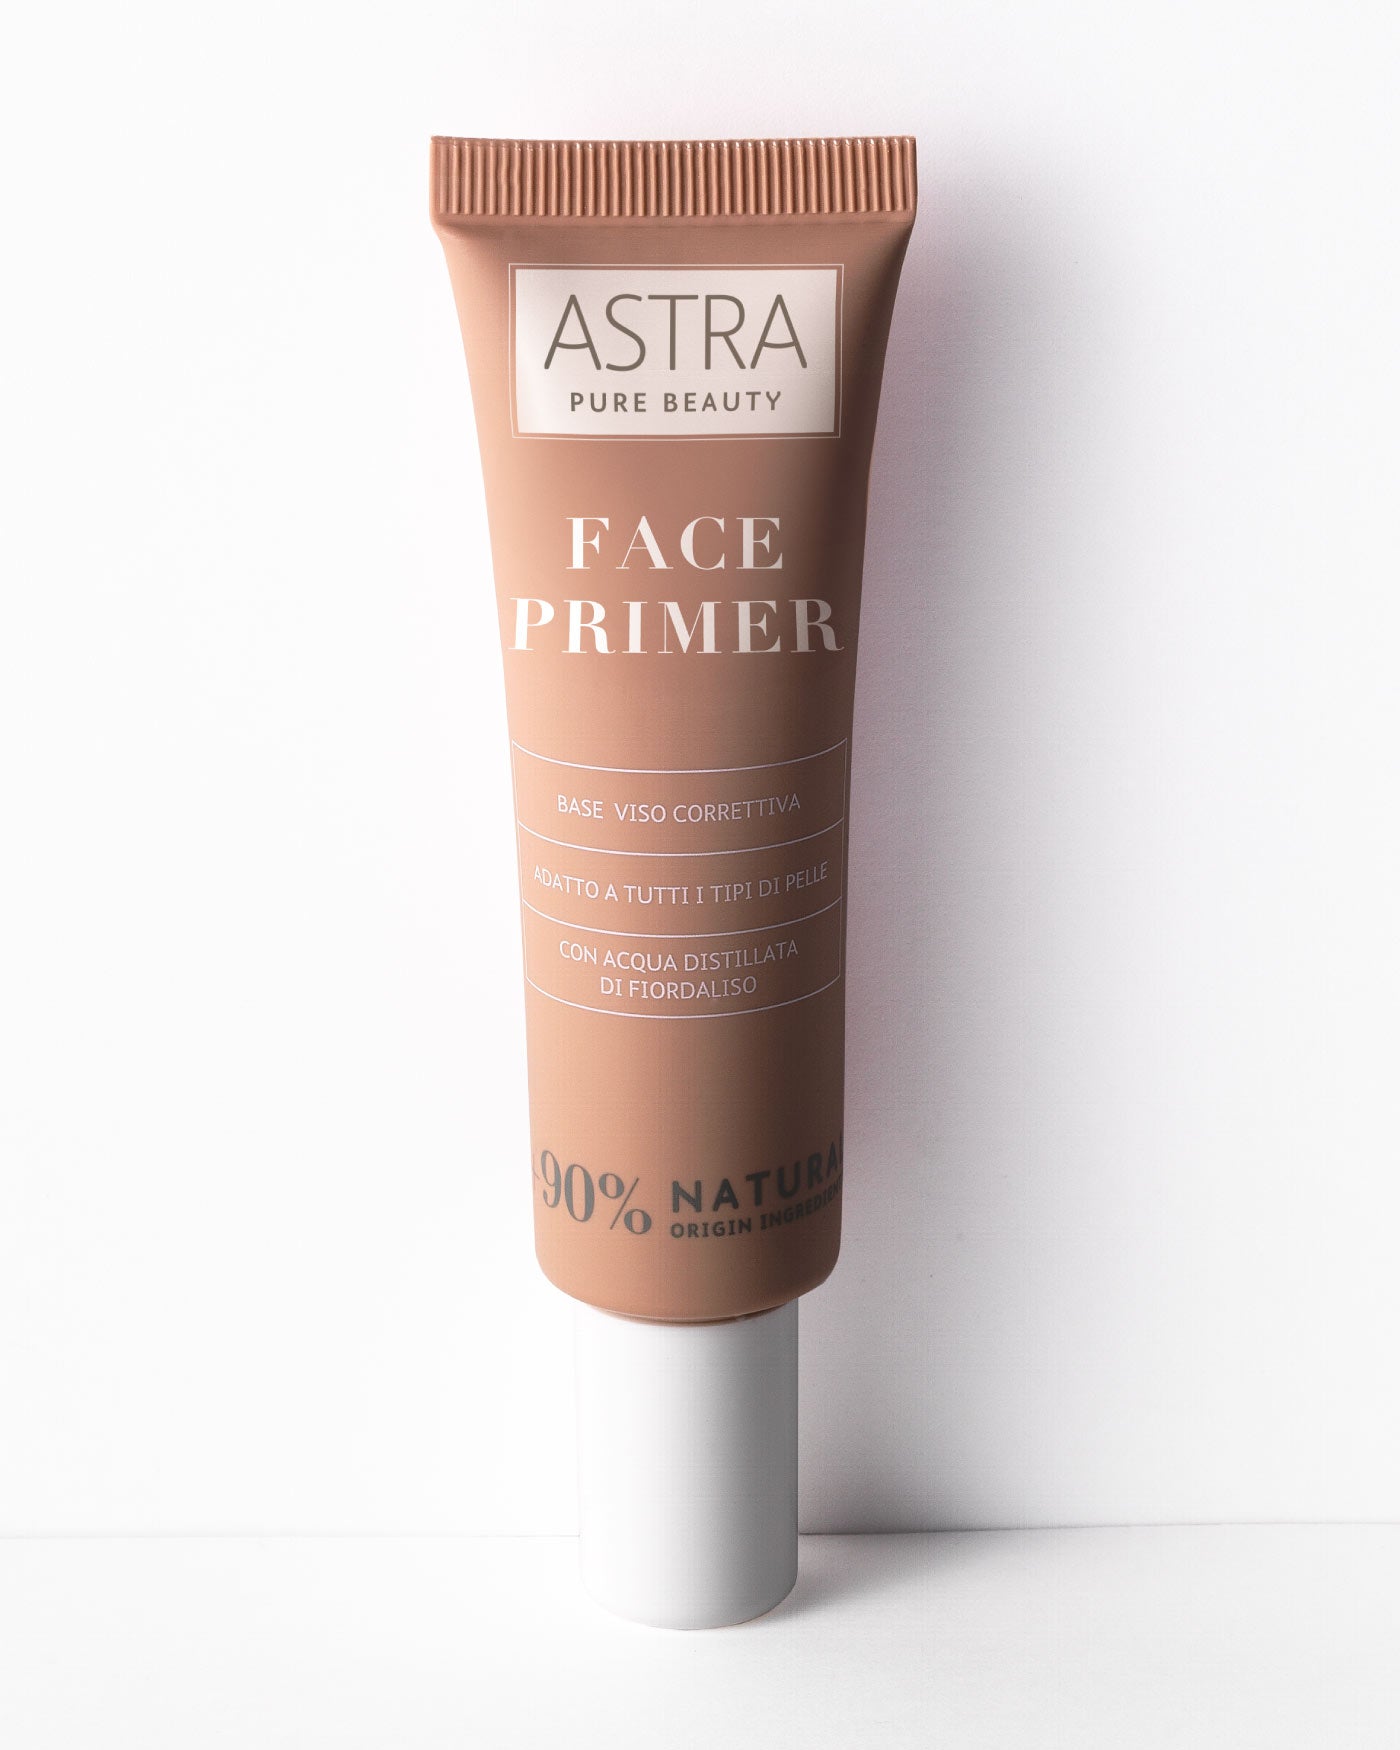 PURE BEAUTY FACE PRIMER - Pure Beauty Face - Astra Make-Up